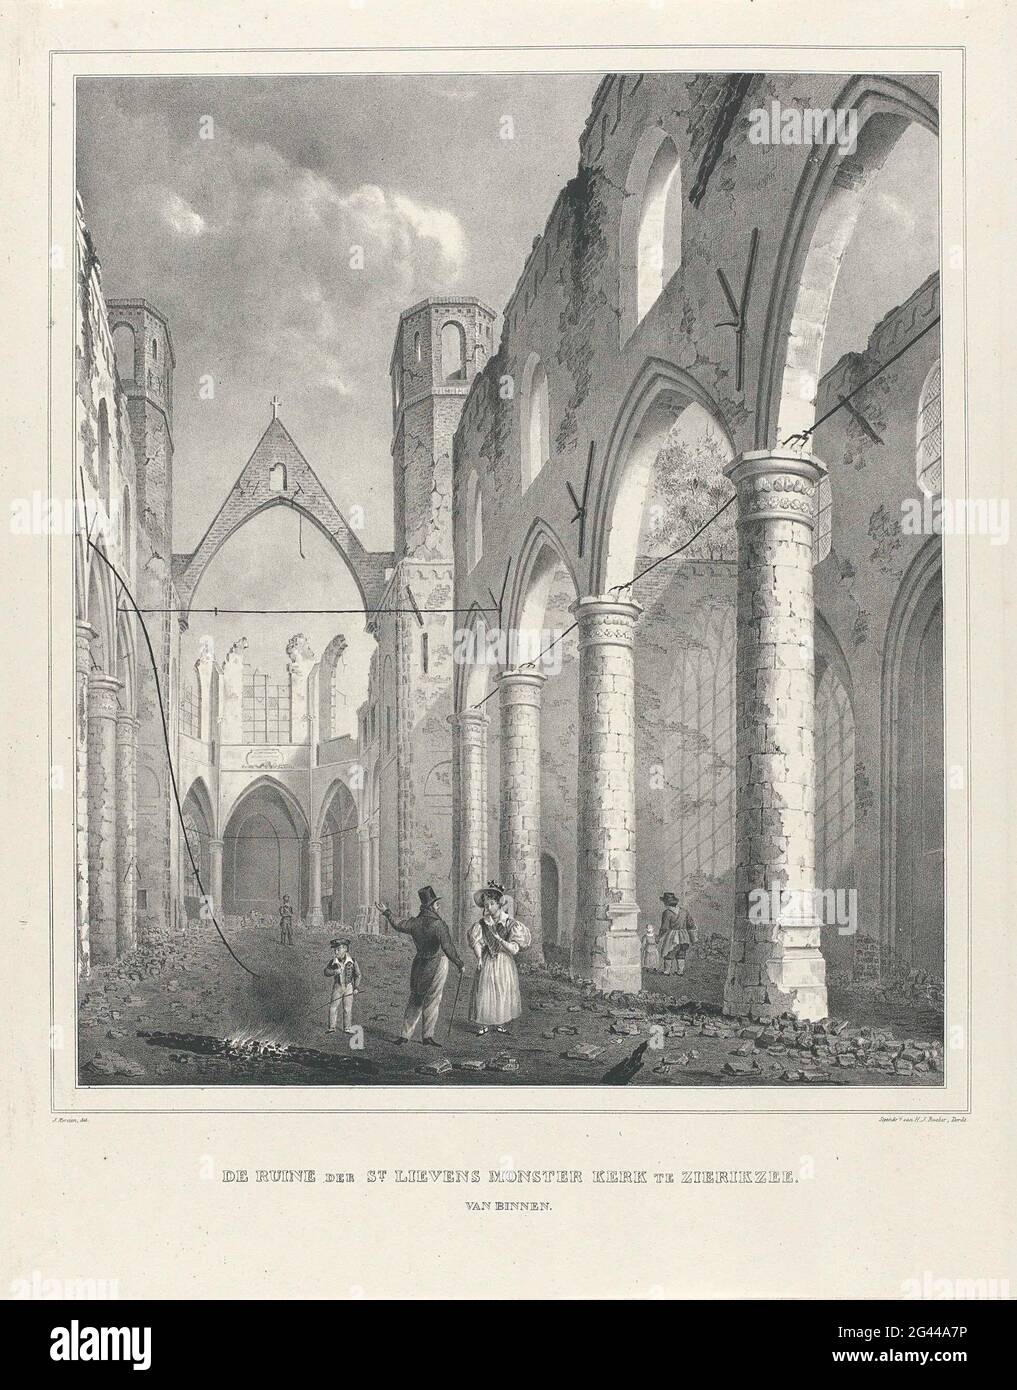 Ruin of the Sint-Lievensmonsterkerk in Zierikzee, after the fire of 1832; The Ruiner of St. Lievens Monster Church, in Zierikzee, from the inside for the fire. Ruin of the Sint-Lievensmonsterkerk in Zierikzee, after the fire of 6 October 1832. View in the interior to where the organ was. See also the pendant with the church in welfare before the fire. Stock Photo